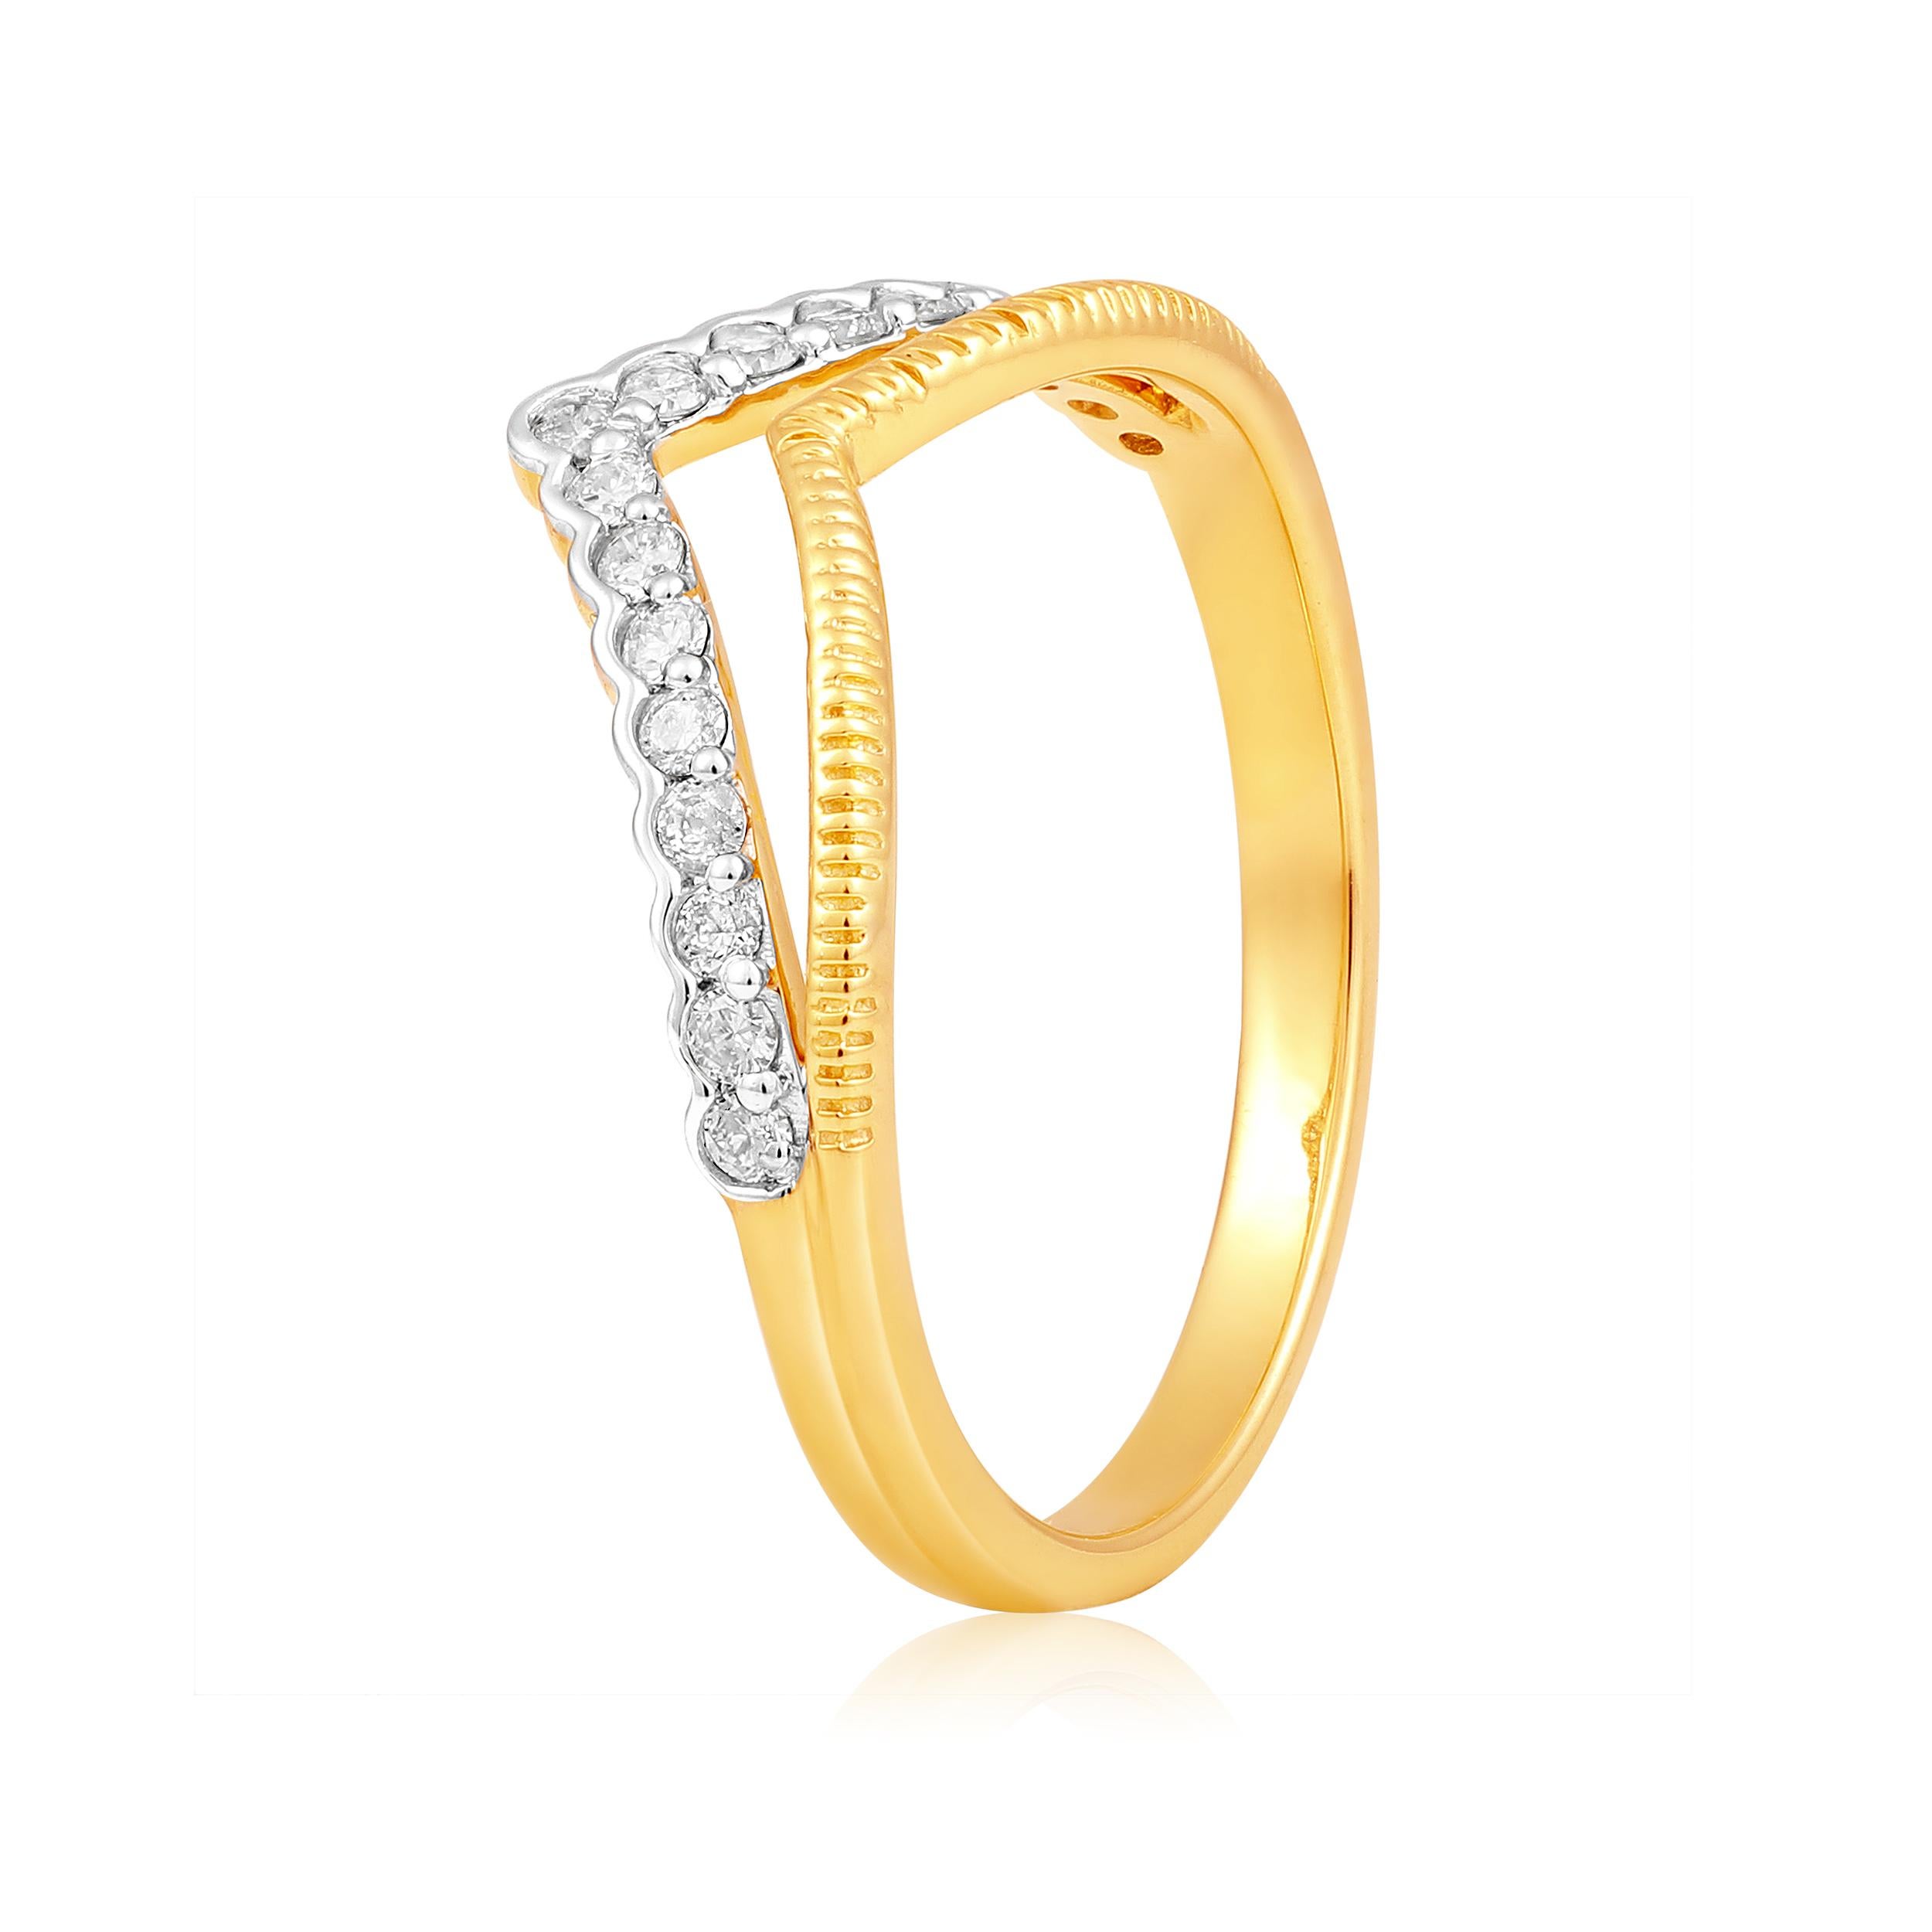 Ring Size: US 7.5 

Crafted in 1.91 grams of 10K Yellow Gold, the ring contains 17 stones of Round Diamonds with a total of 0.2 carat in F-G color and I1-I2 clarity.

CONTEMPORARY AND TIMELESS ESSENCE: Crafted in 14-karat/18-karat with 100% natural